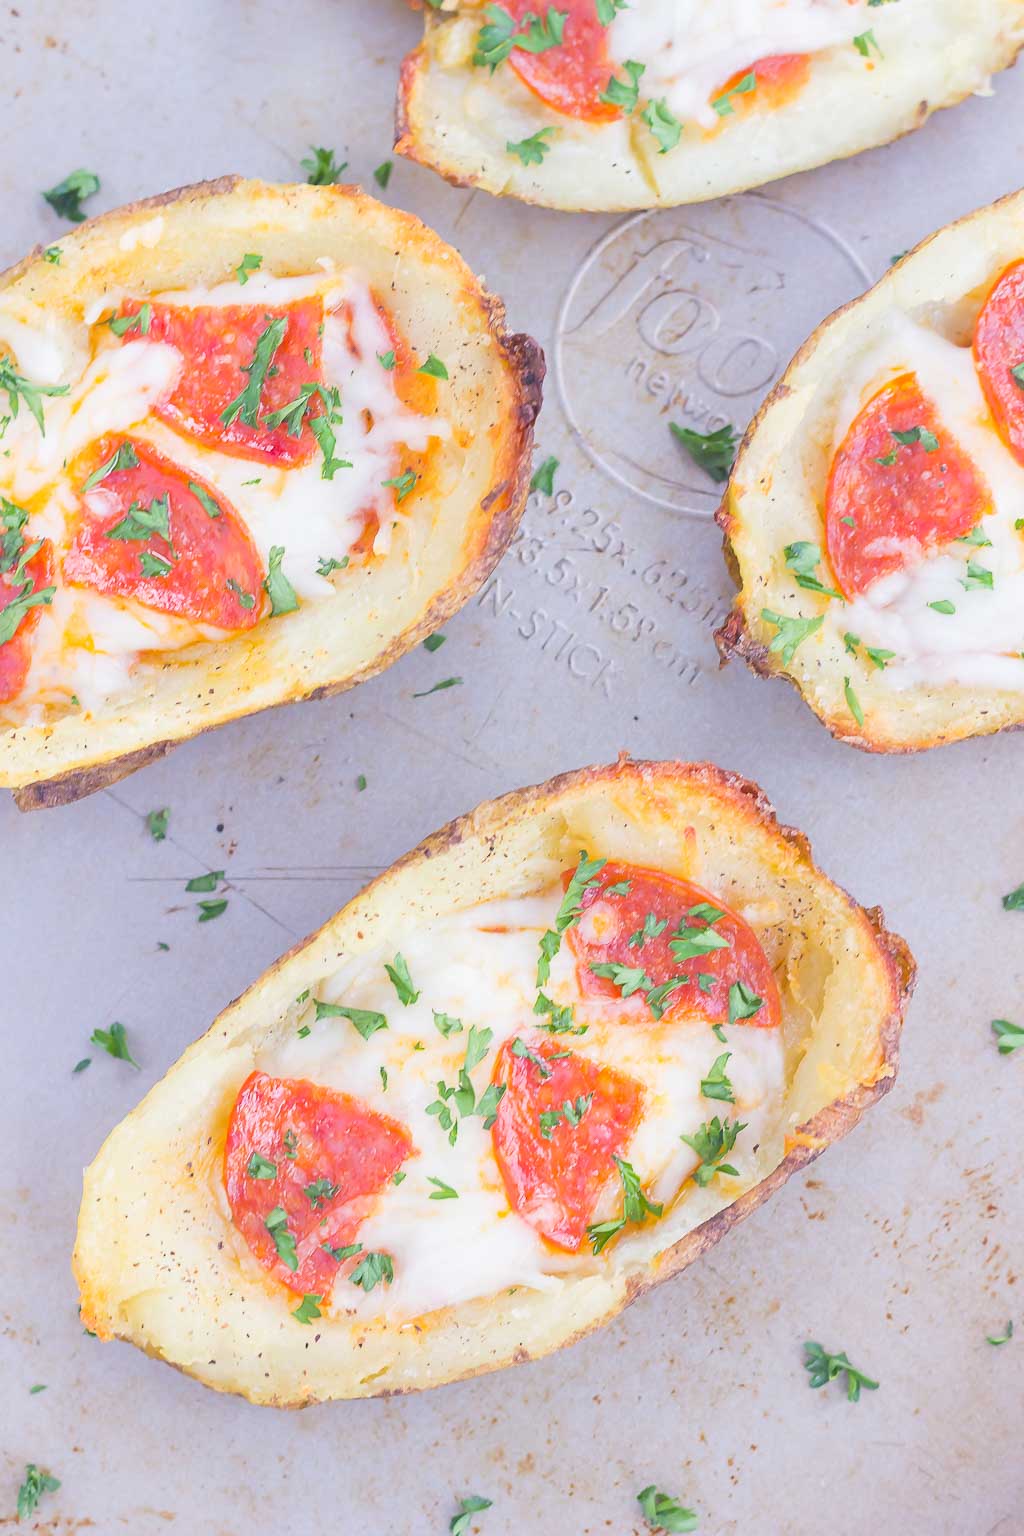 Loaded with pizza sauce, fresh mozzarella cheese, pepperoni and seasonings, these Pizza Potato Skins are sure to be a crowd-pleasing appetizer or snack!